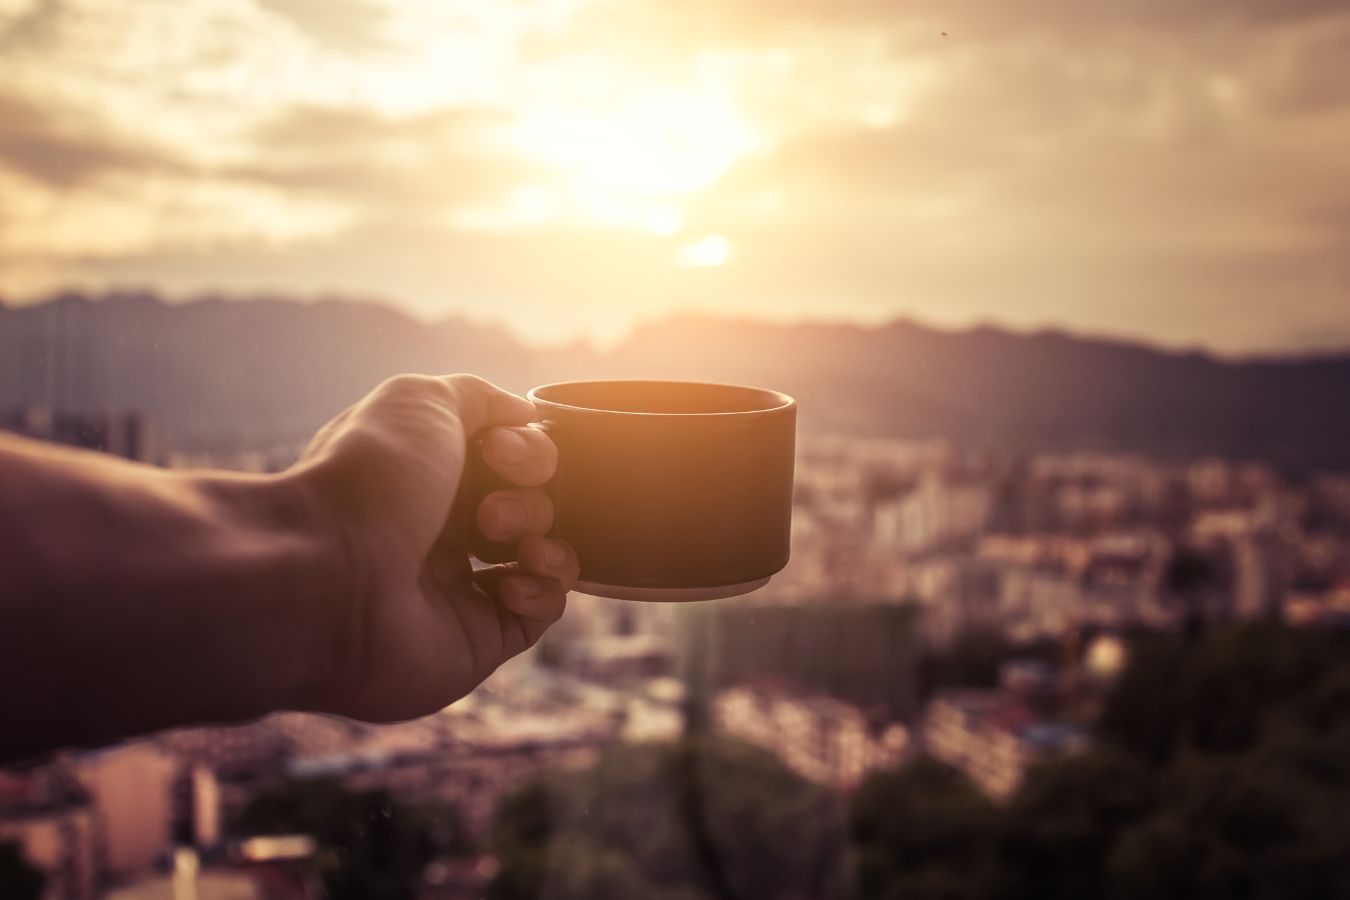 "Golden Hour" To Drink Coffee During The Day: Not In The Morning When You Wake Up!